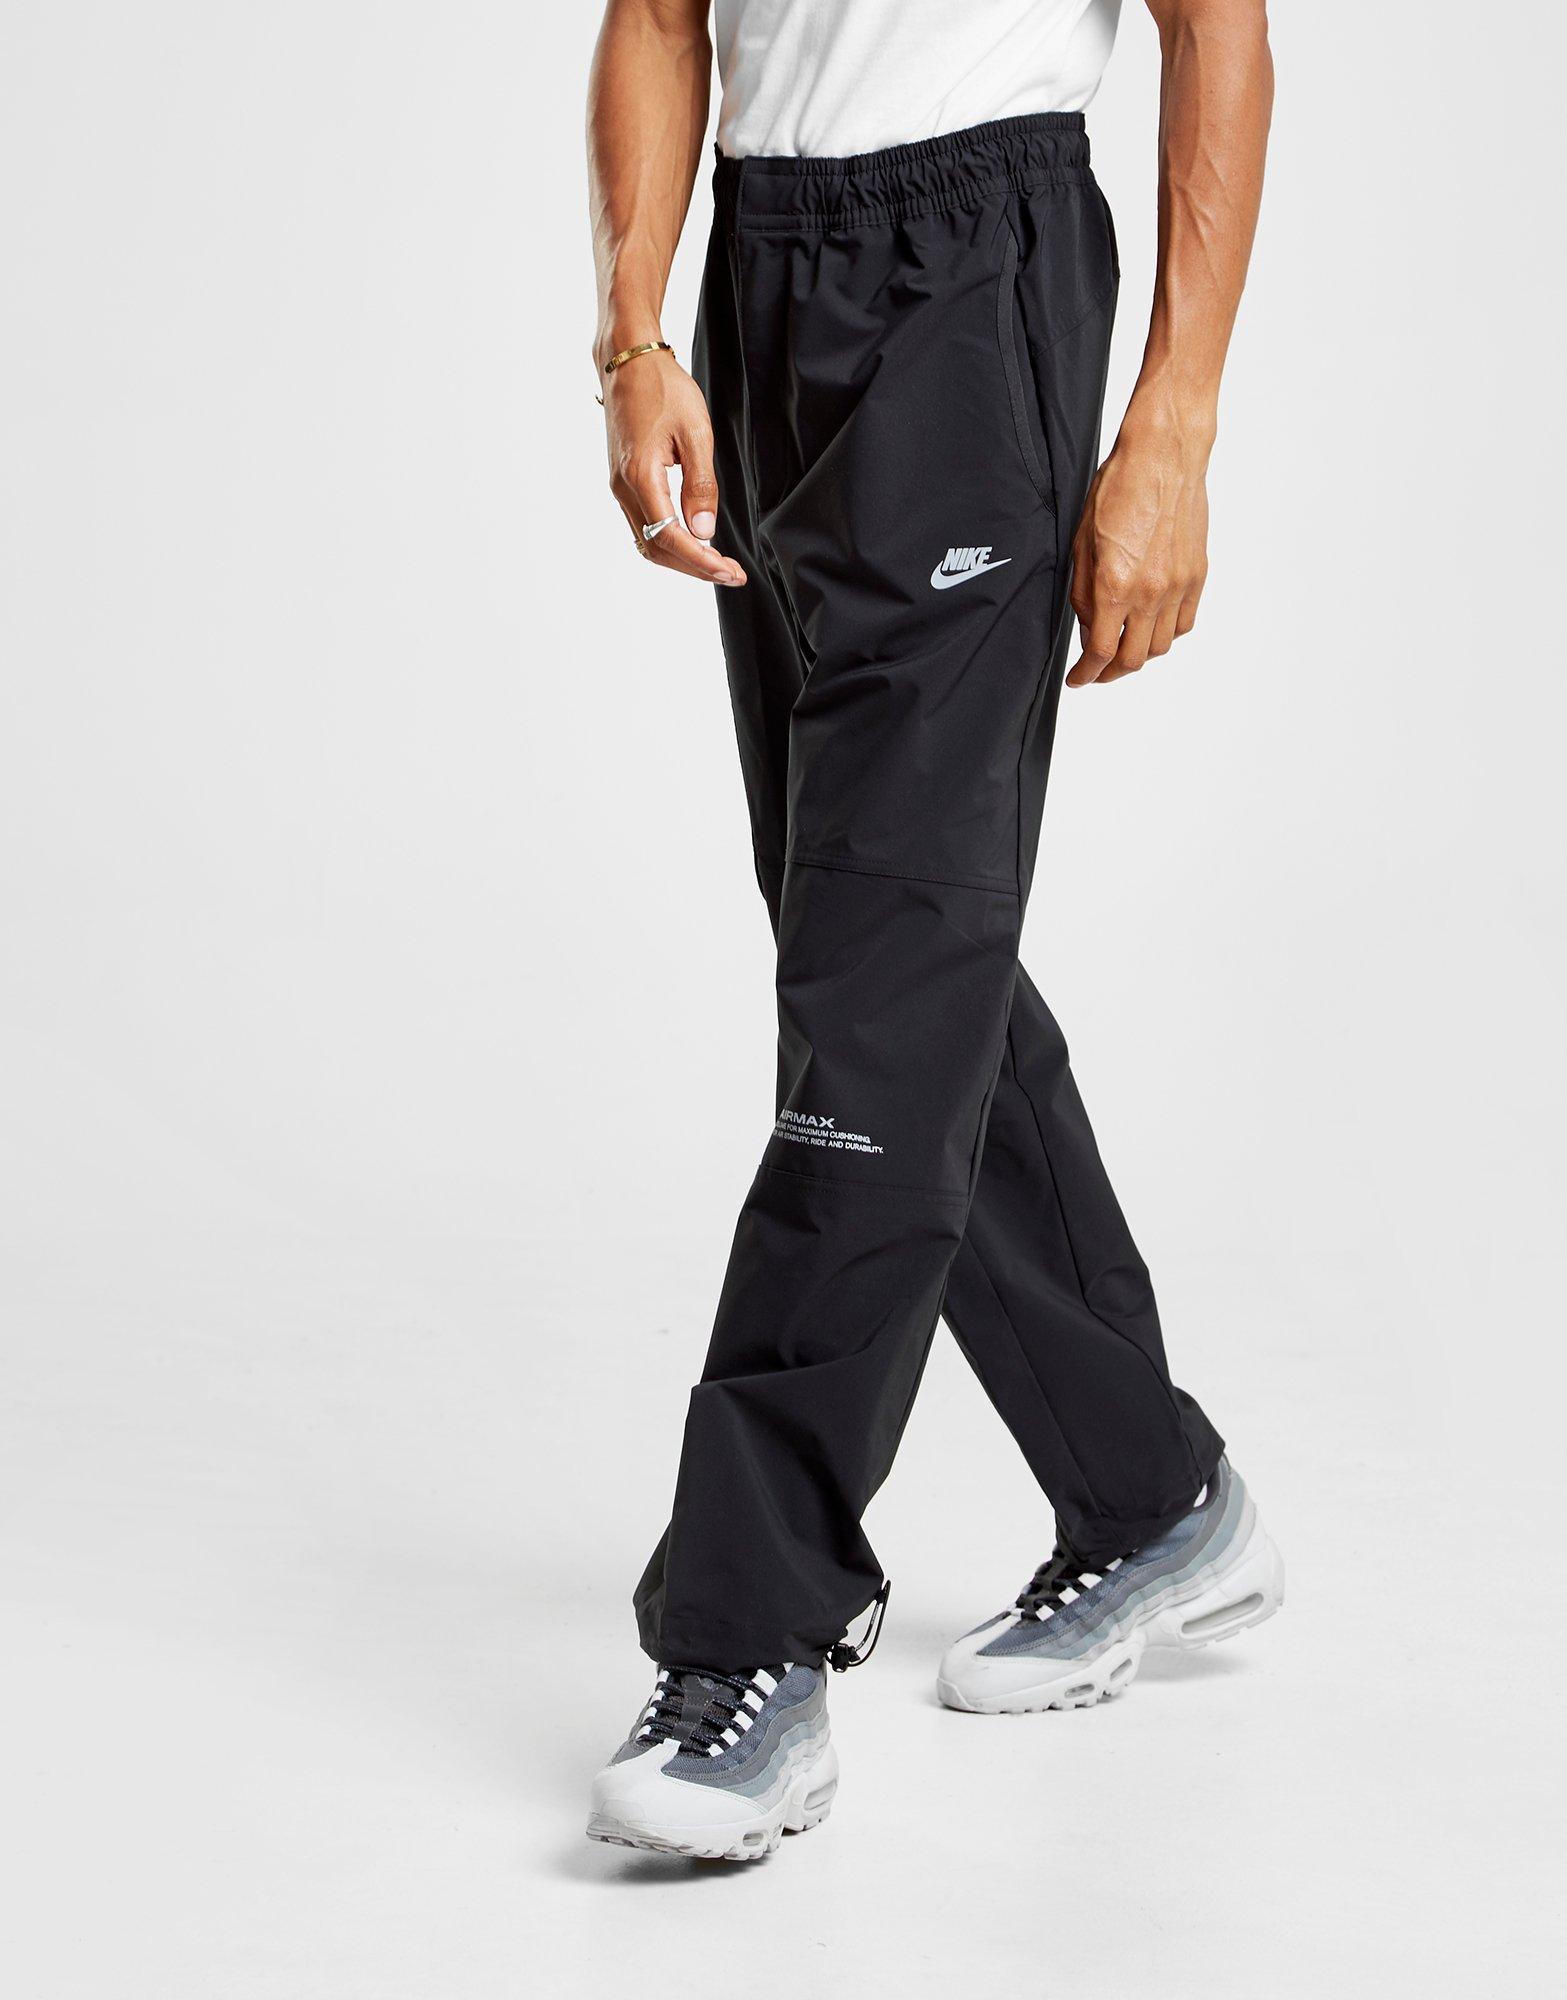 air max track pants new style 33724 355e3